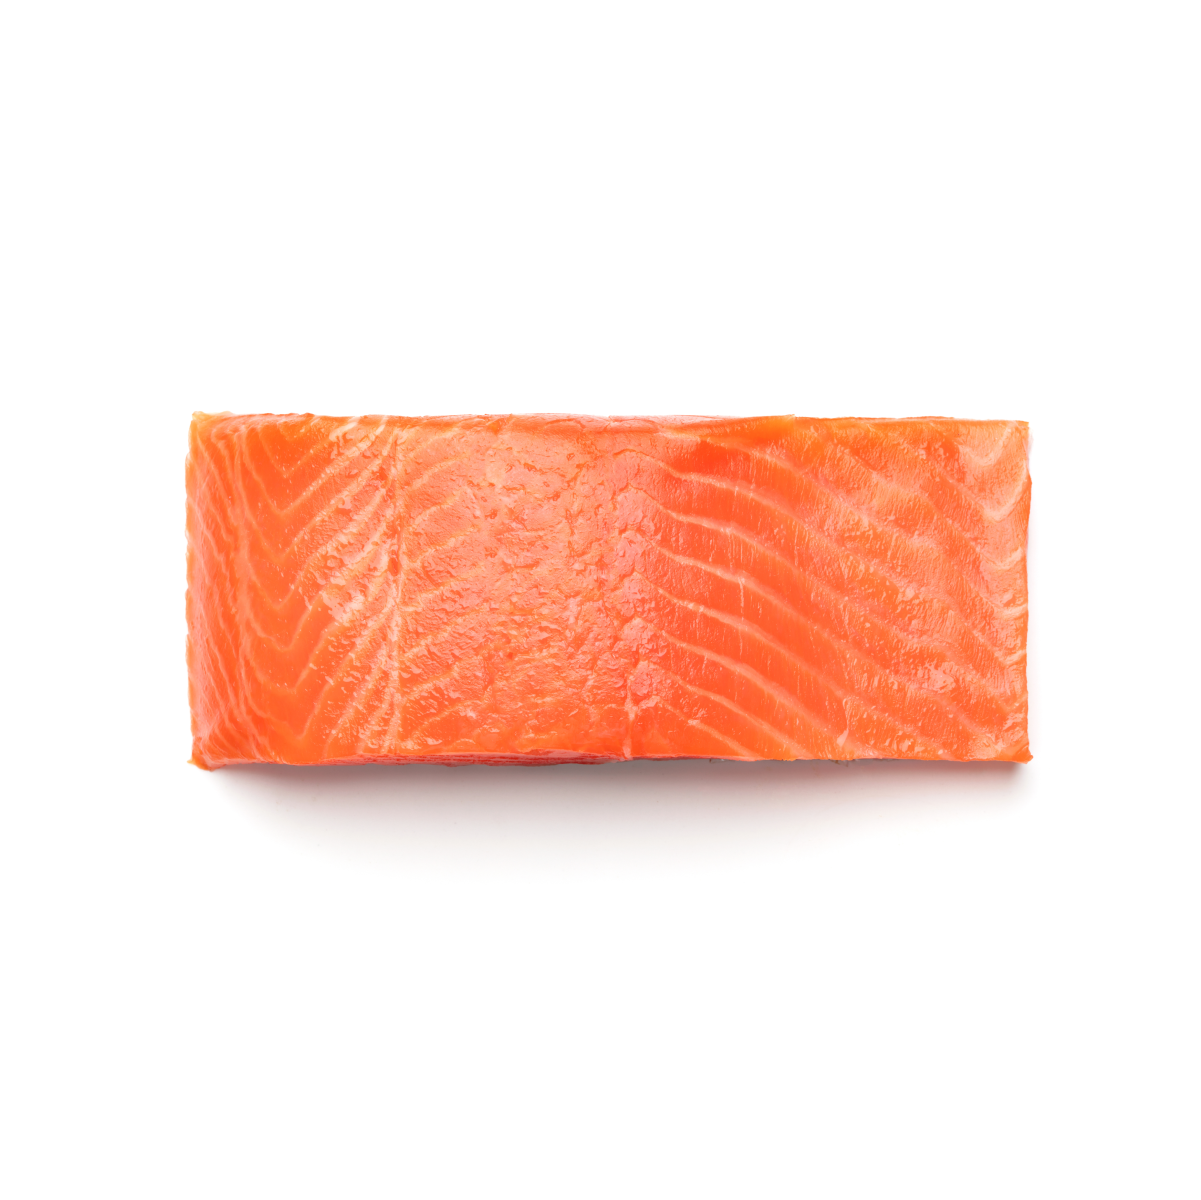 30% Sustainably Sourced Salmon